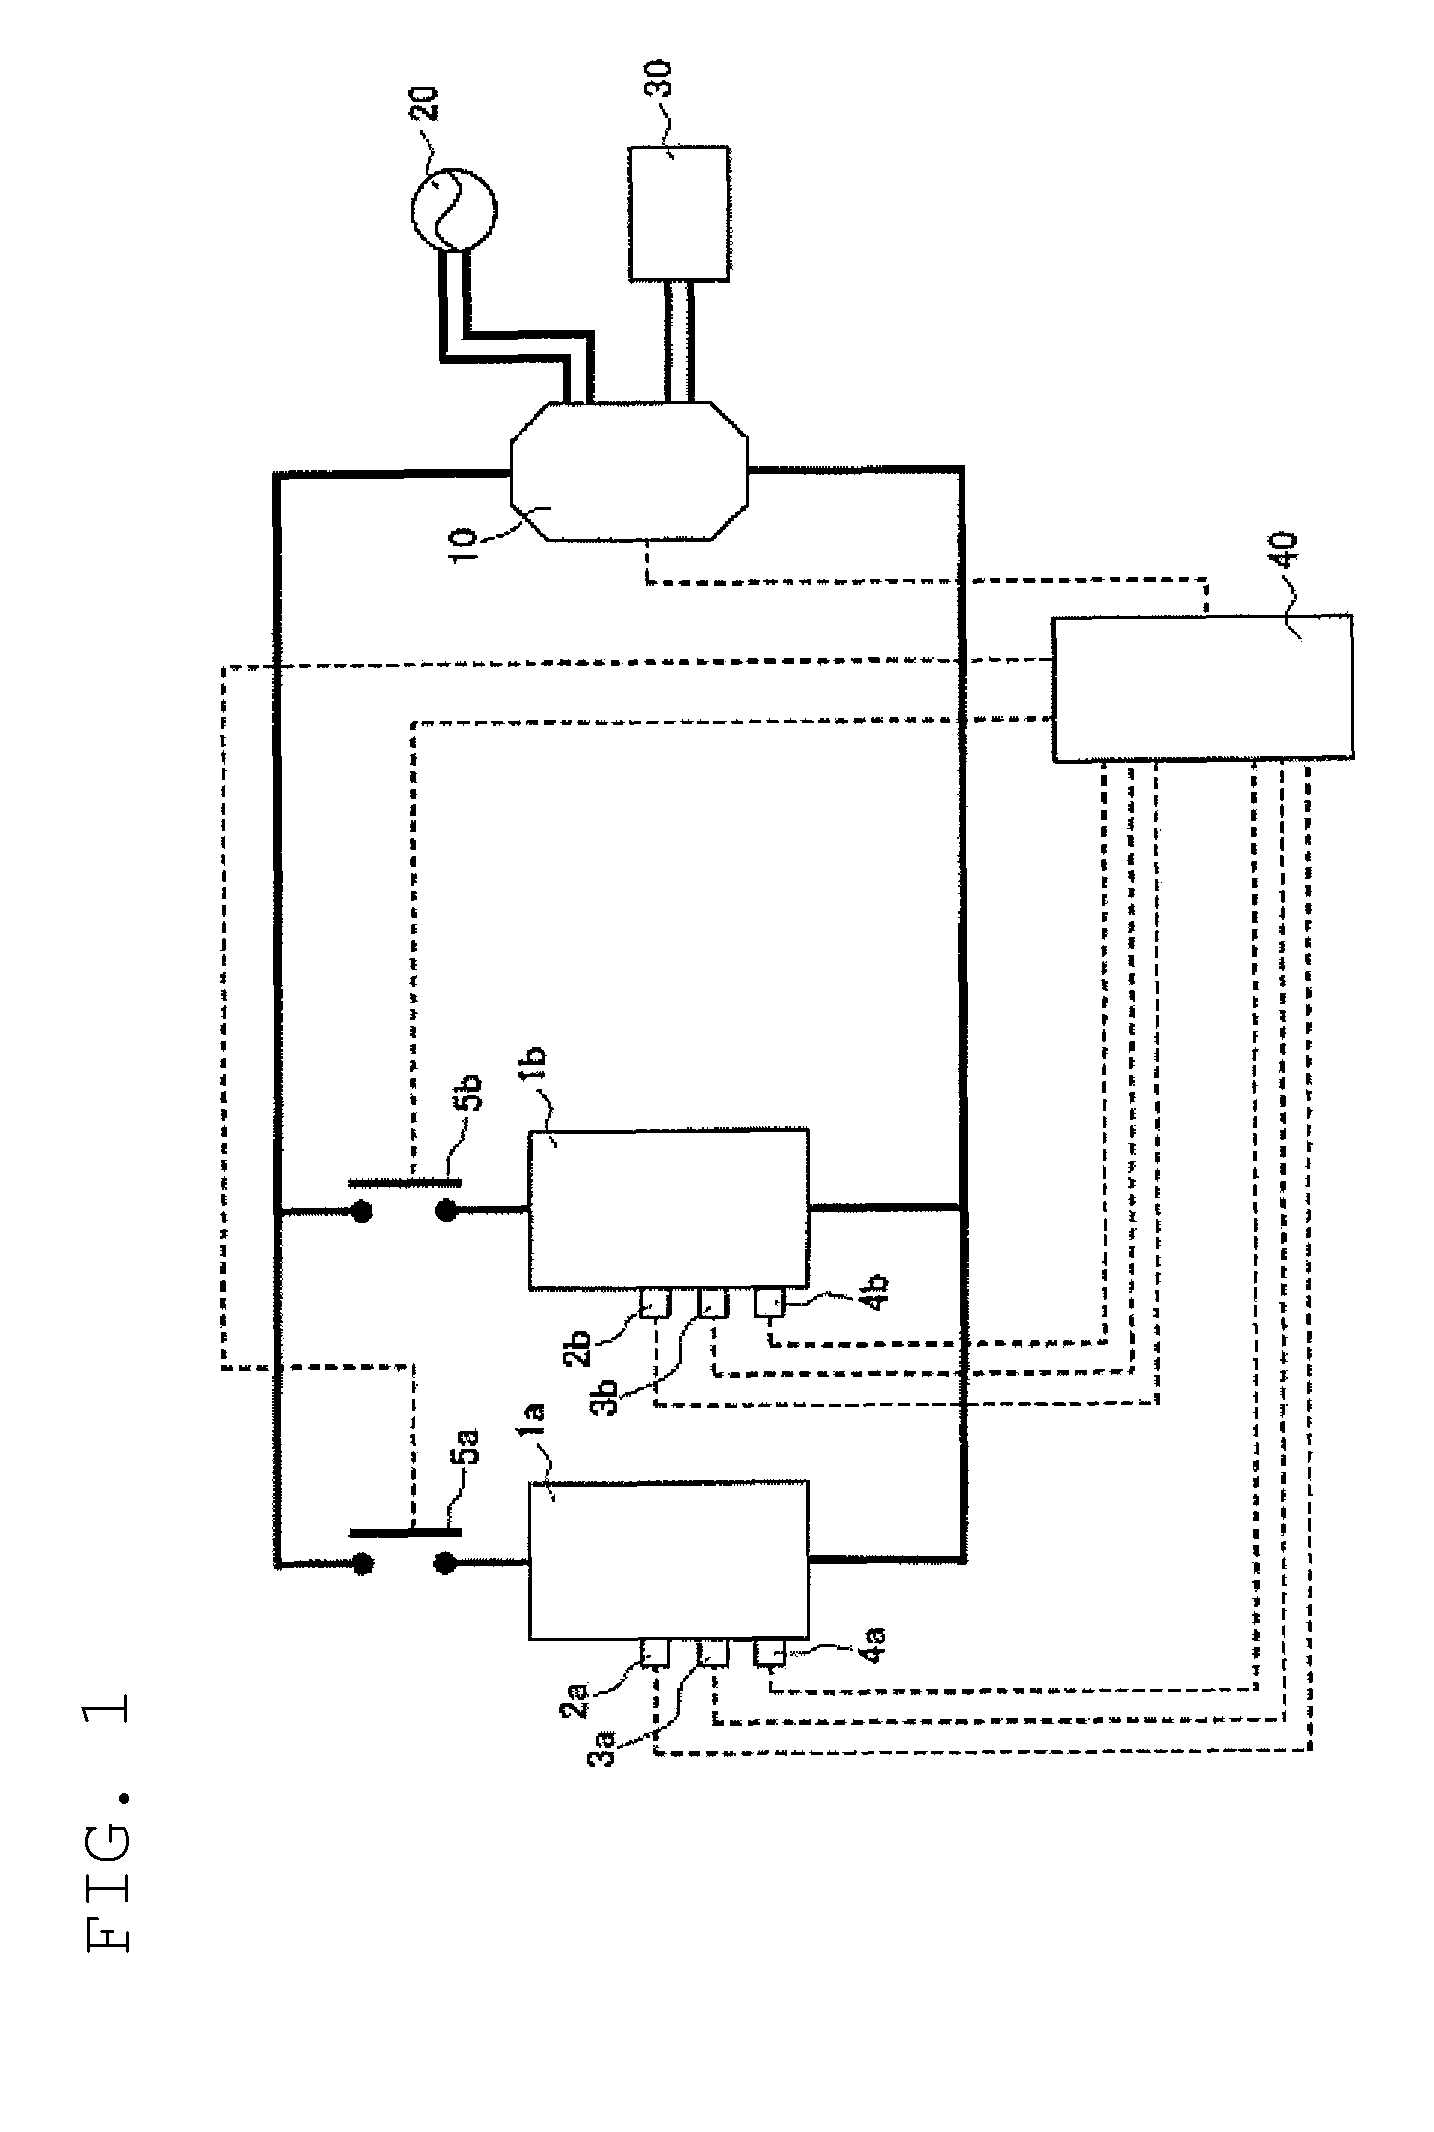 Control device to control deterioration of batteries in a battery stack